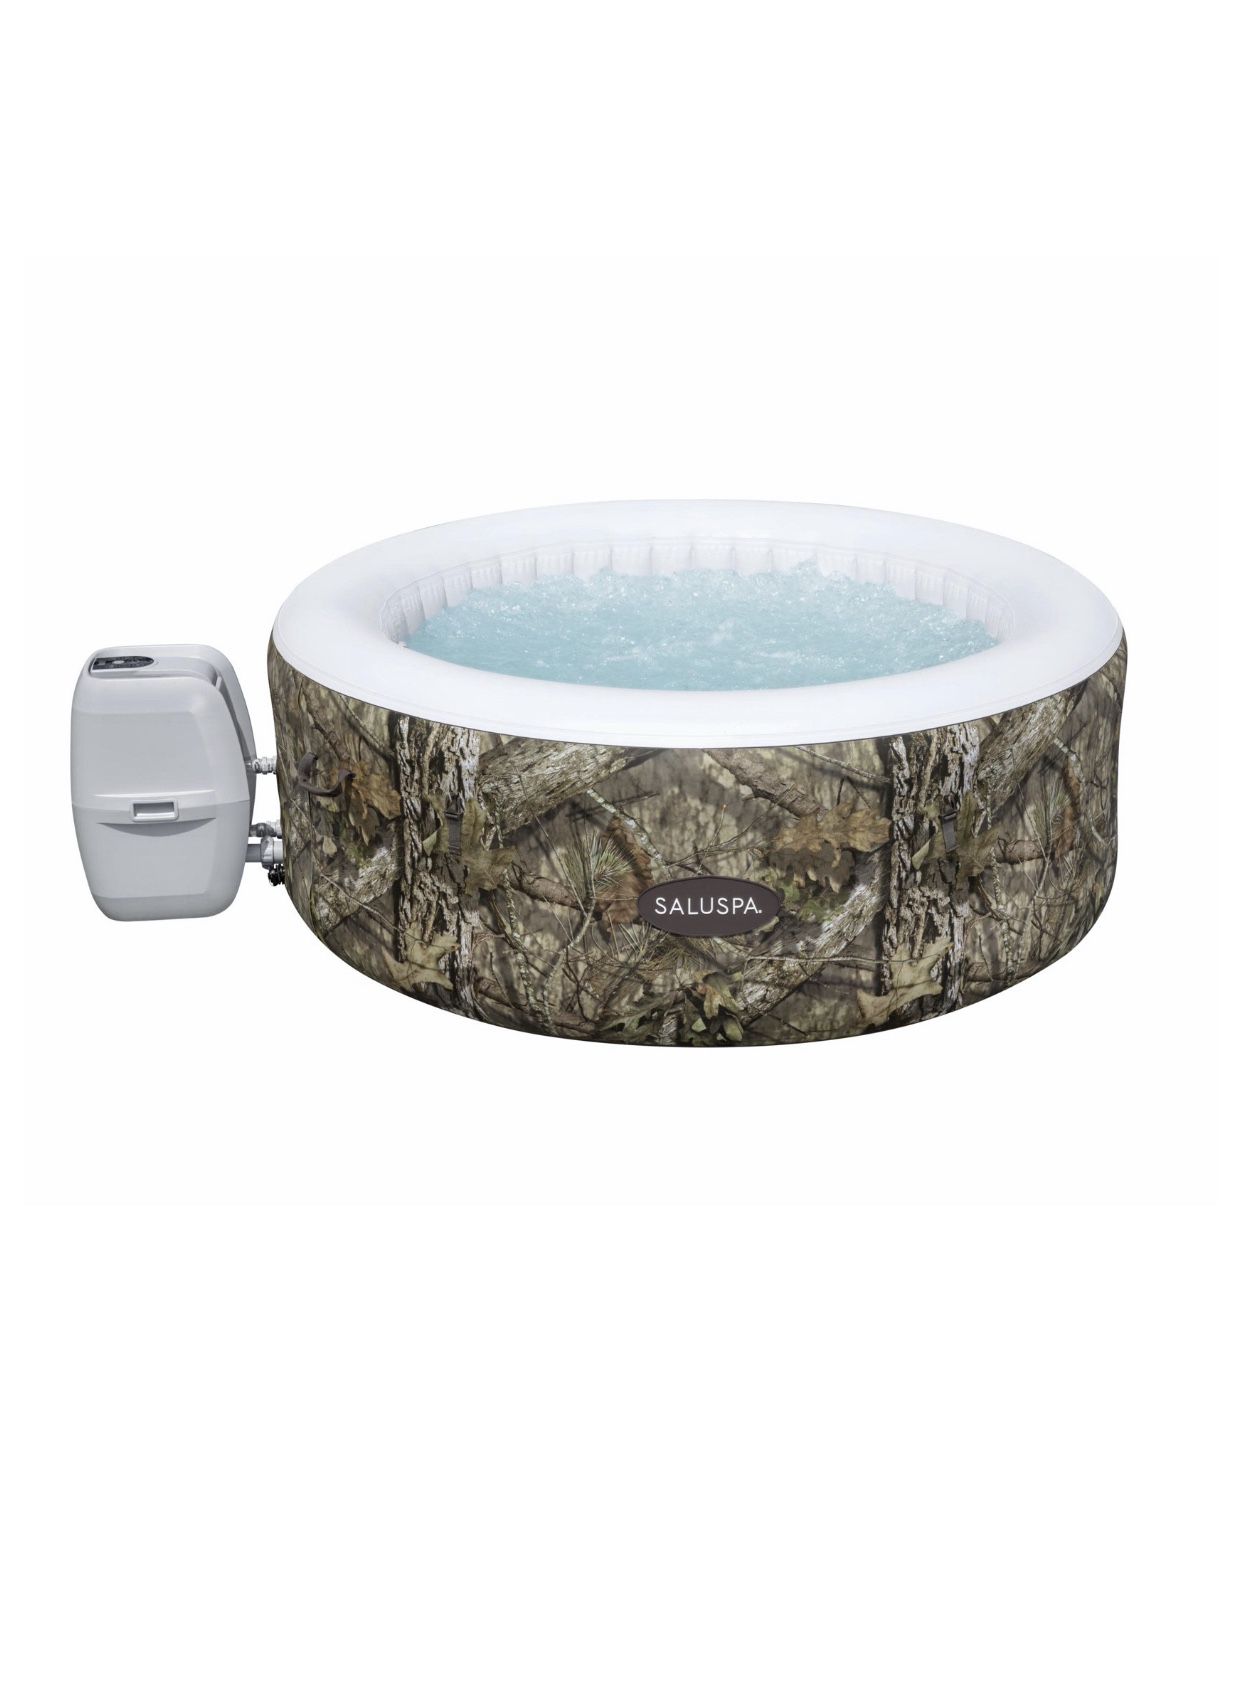 SaluSpa Mossy Oak Inflatable Hot Tub 2-4 Person Outdoor Spa 